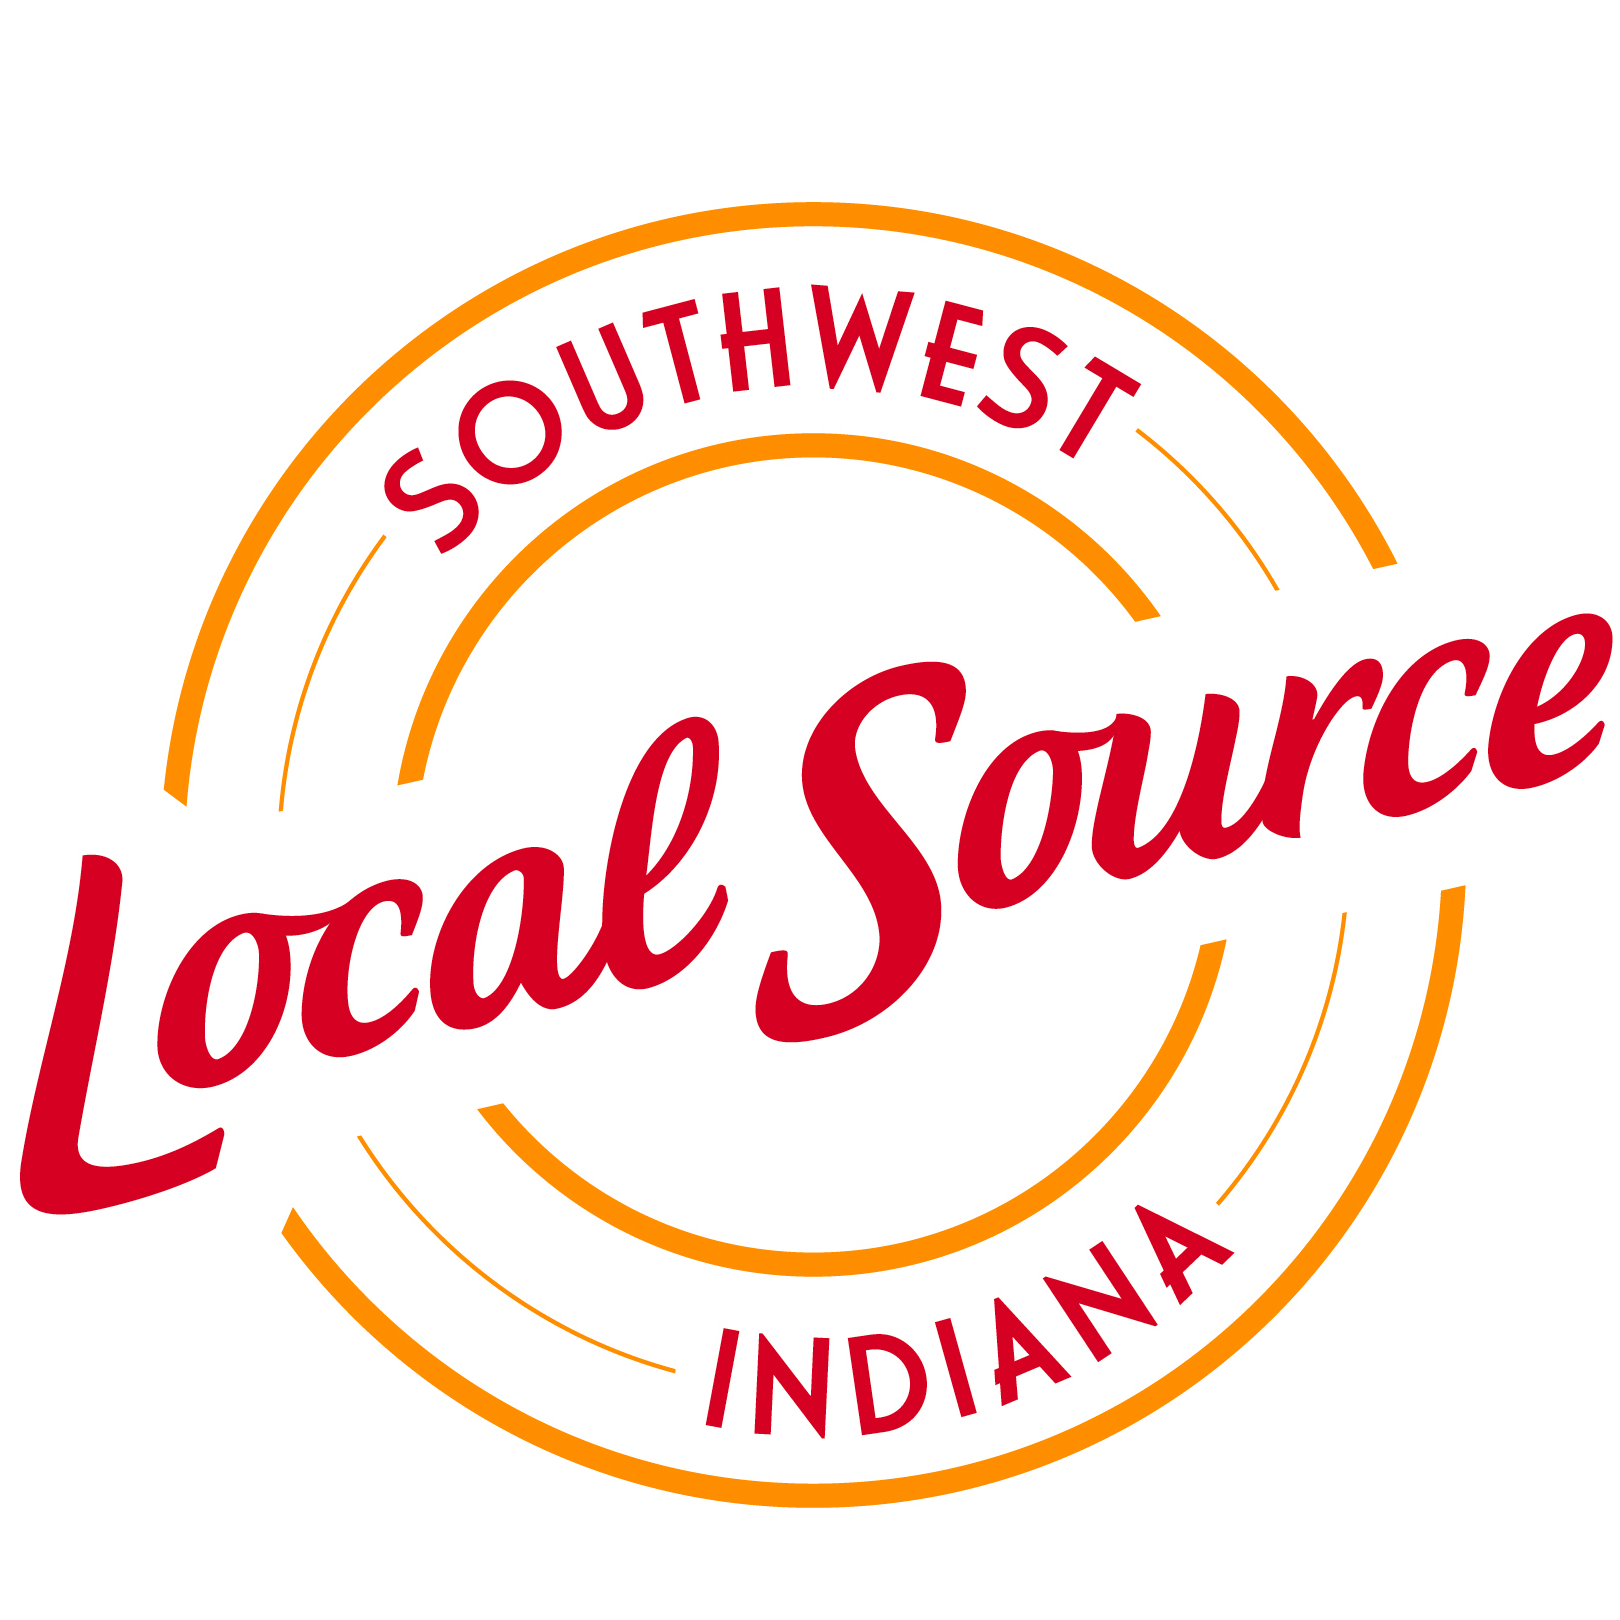 Local Source